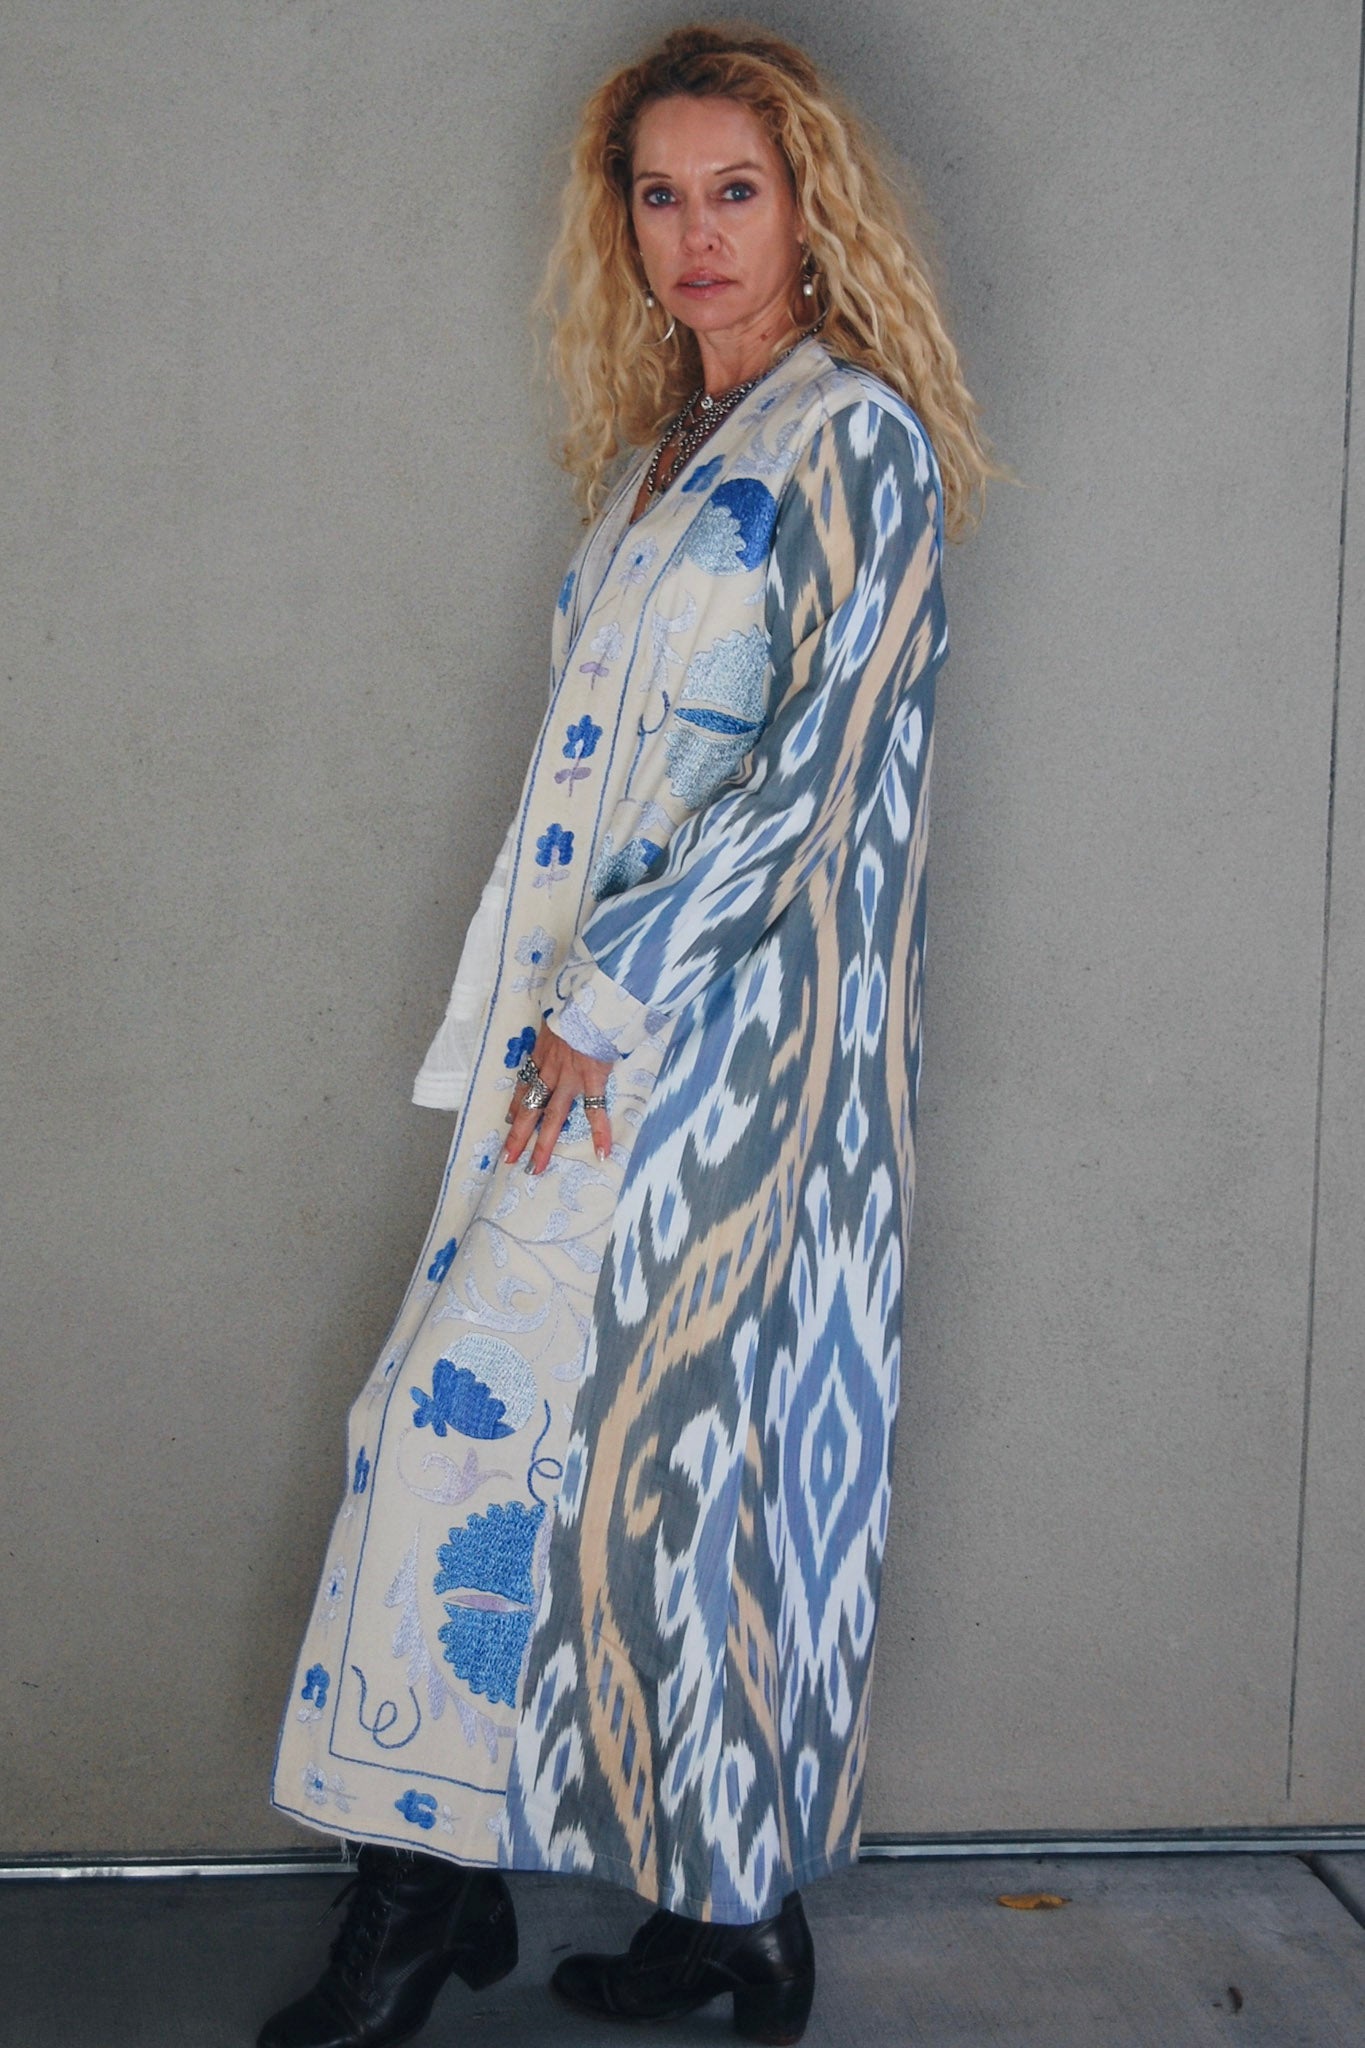 Load image into Gallery viewer, The Dreamer Jacket in Ikat Island - SpiritedBoutiques Boho Hippie Boutique Style Jacket, Spirited
